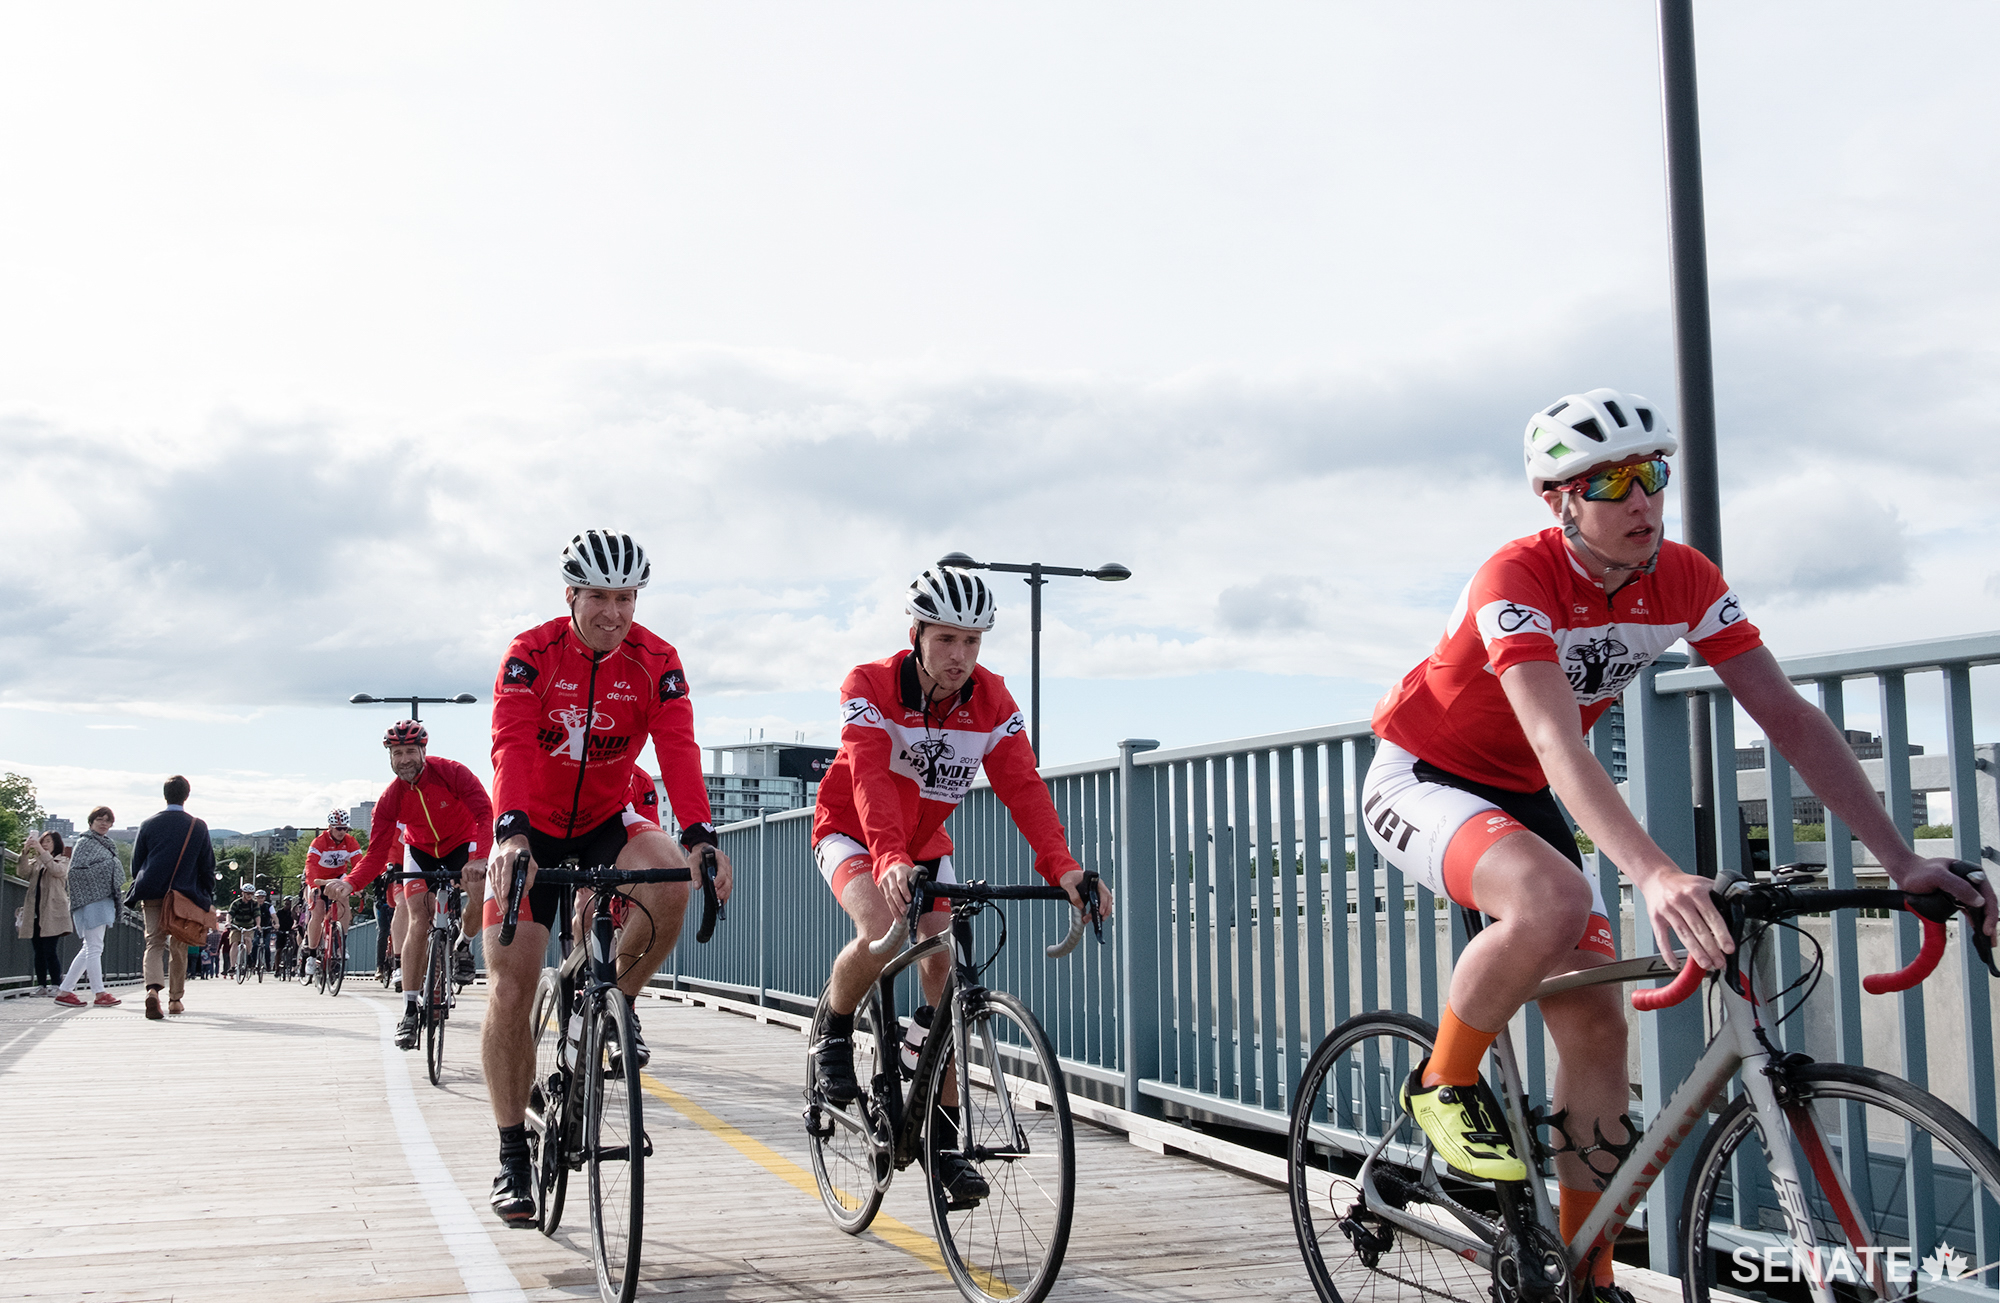 Cyclists cross back from the Quebec side of the Ottawa River via the Alexandra Bridge.